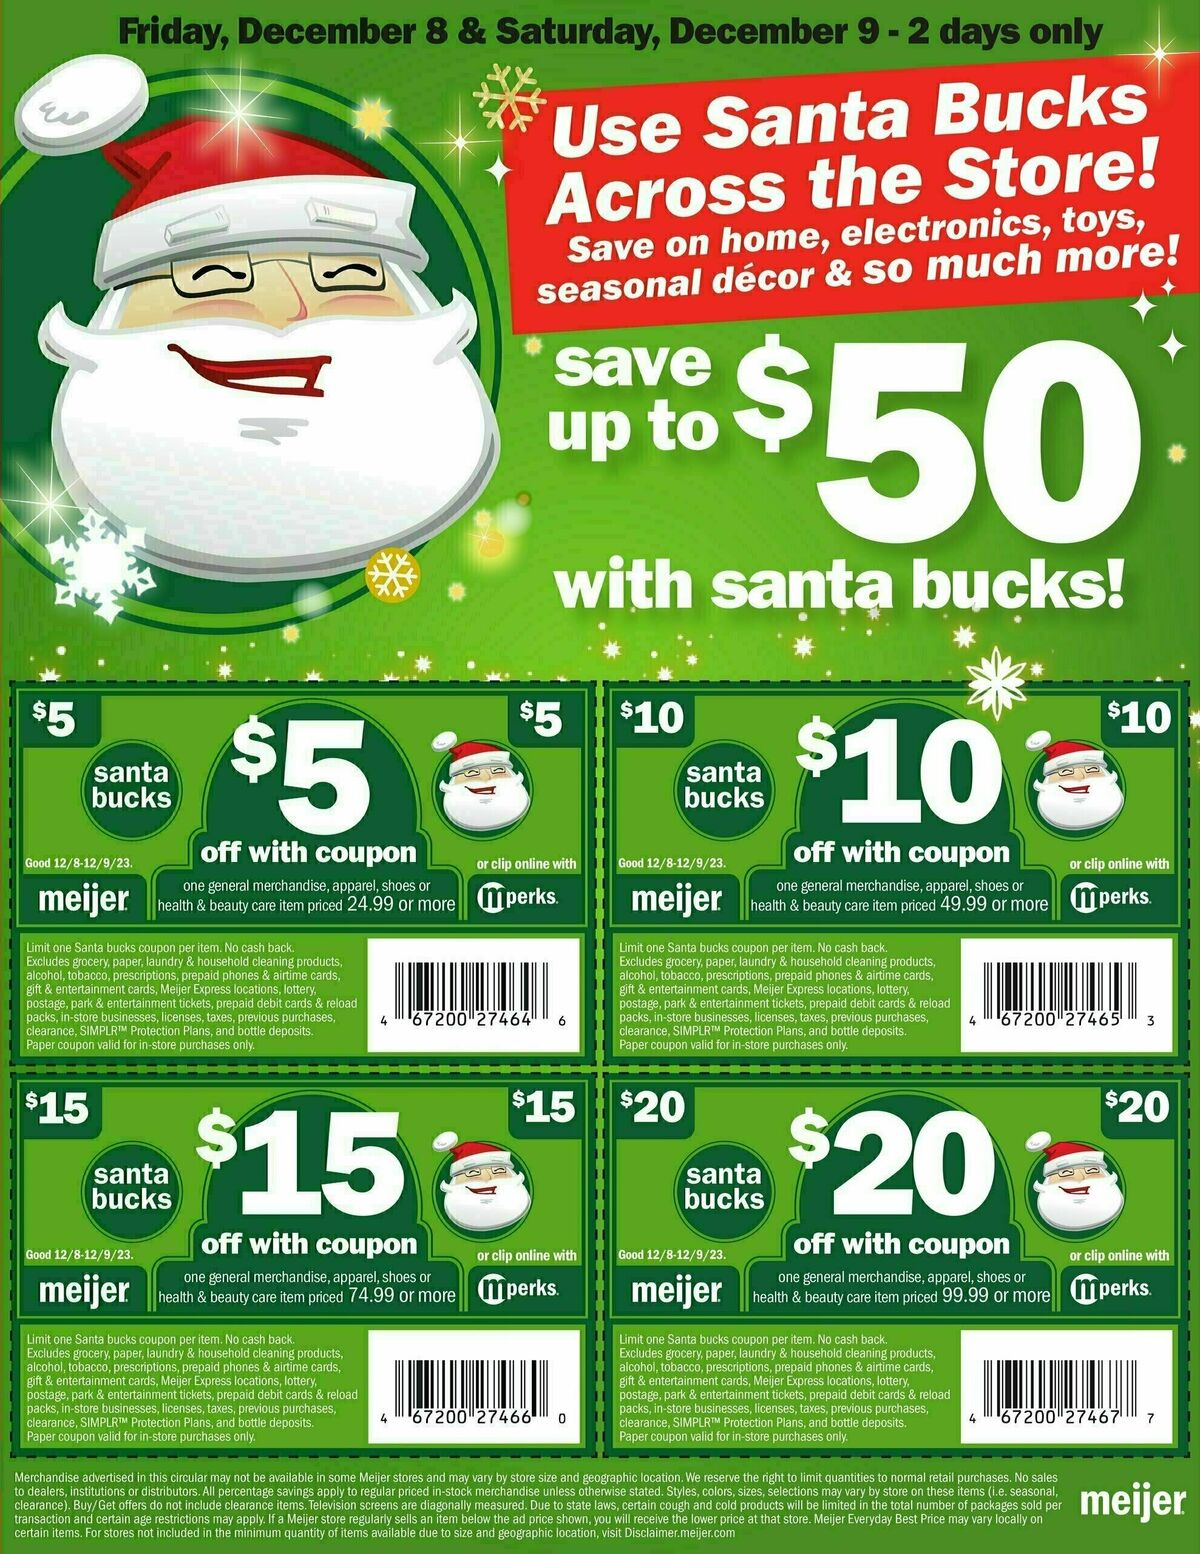 Meijer Hot Deals Ad Weekly Ad from December 3